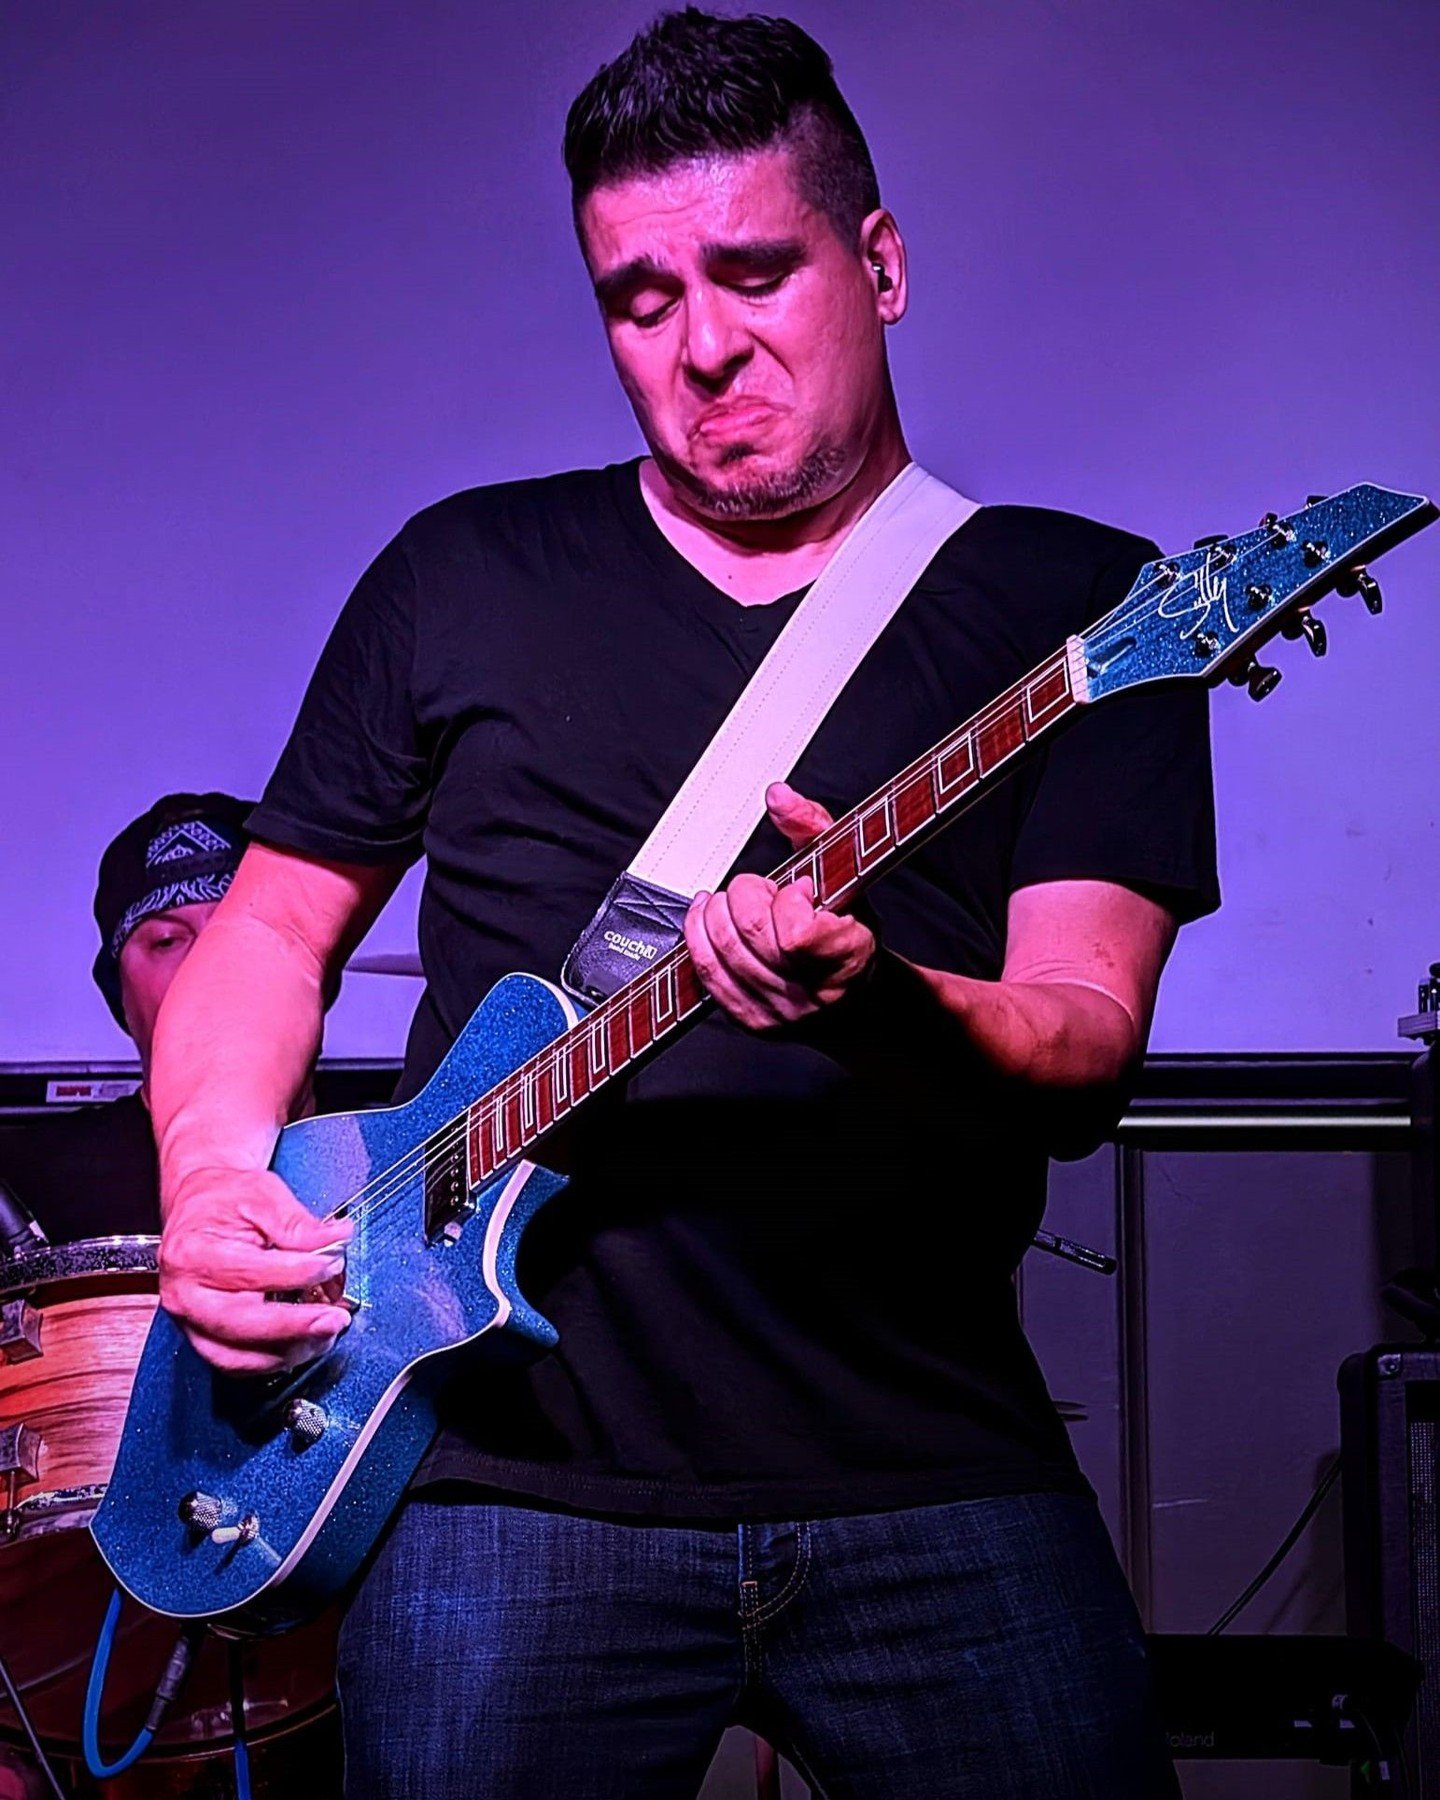 @adamnanez71 in action at Cinco de Sully with the legendary Ice Blue Sparkle '71 Trella (maple fretboard!) 

📸 our pal Sean